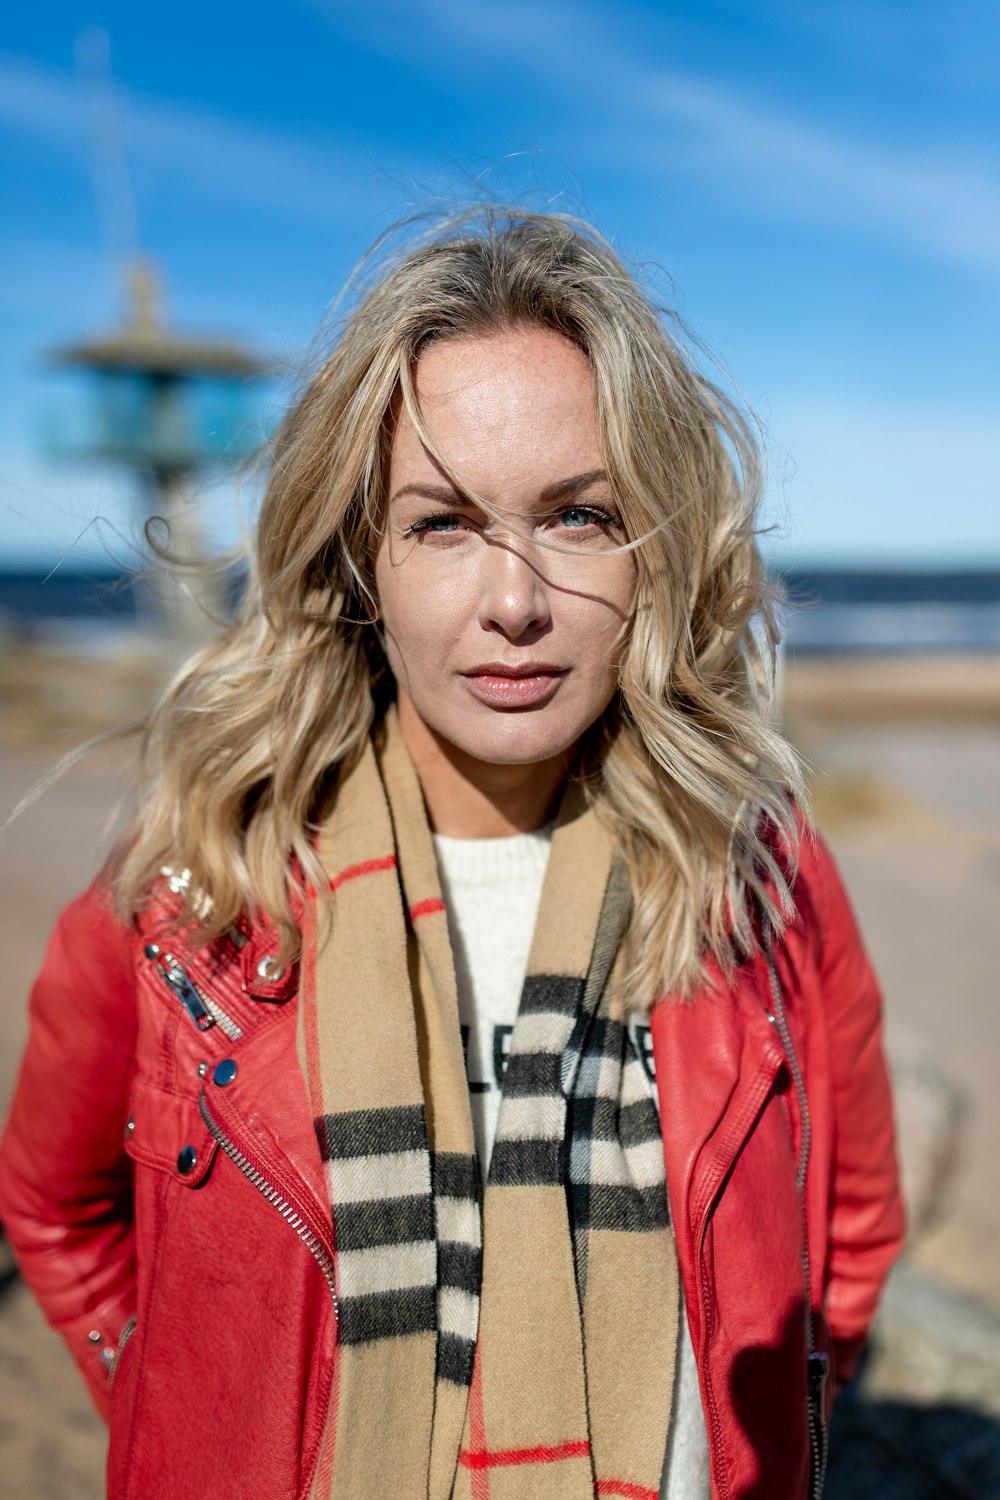 a woman wearing a red jacket and scarf